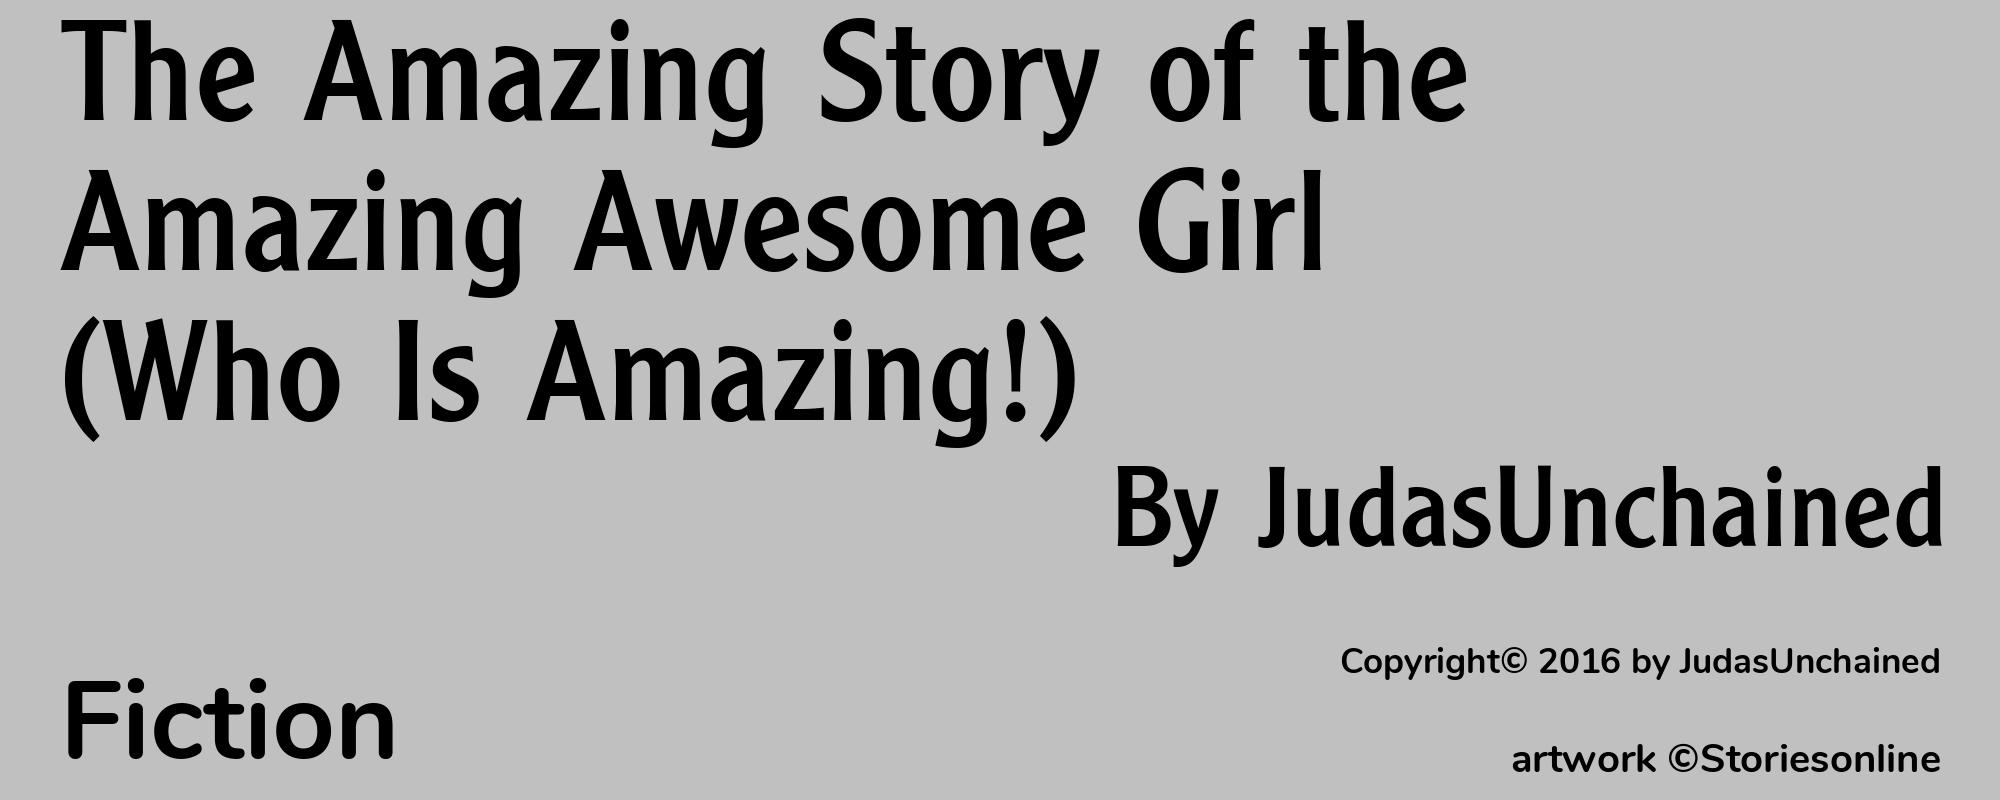 The Amazing Story of the Amazing Awesome Girl (Who Is Amazing!) - Cover